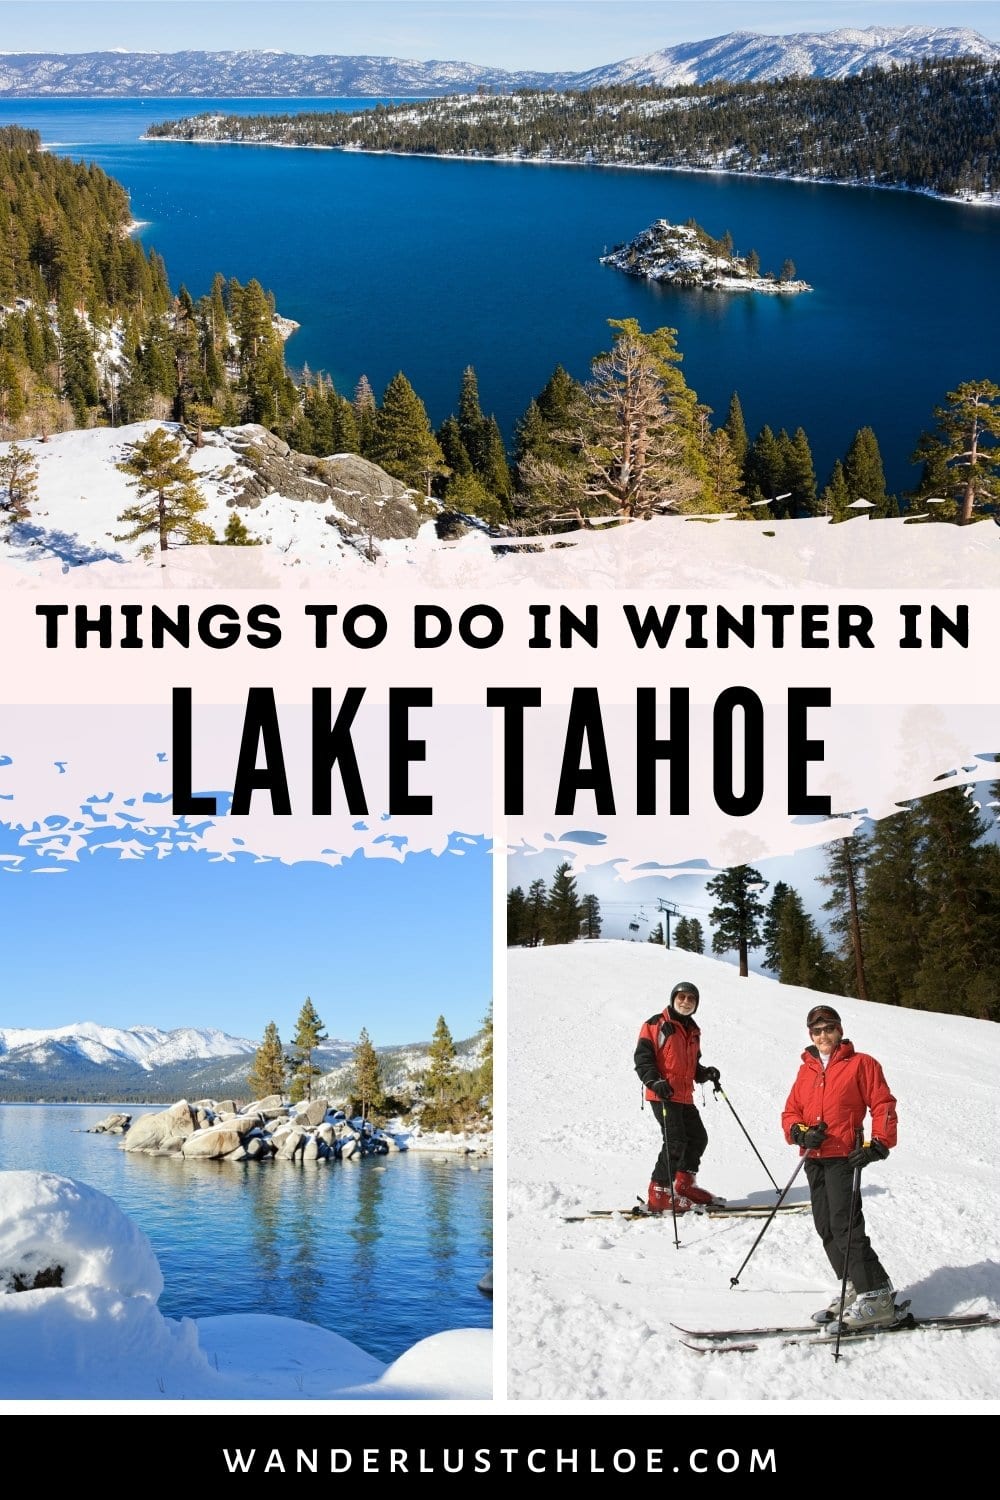 Things to do in Lake Tahoe in winter